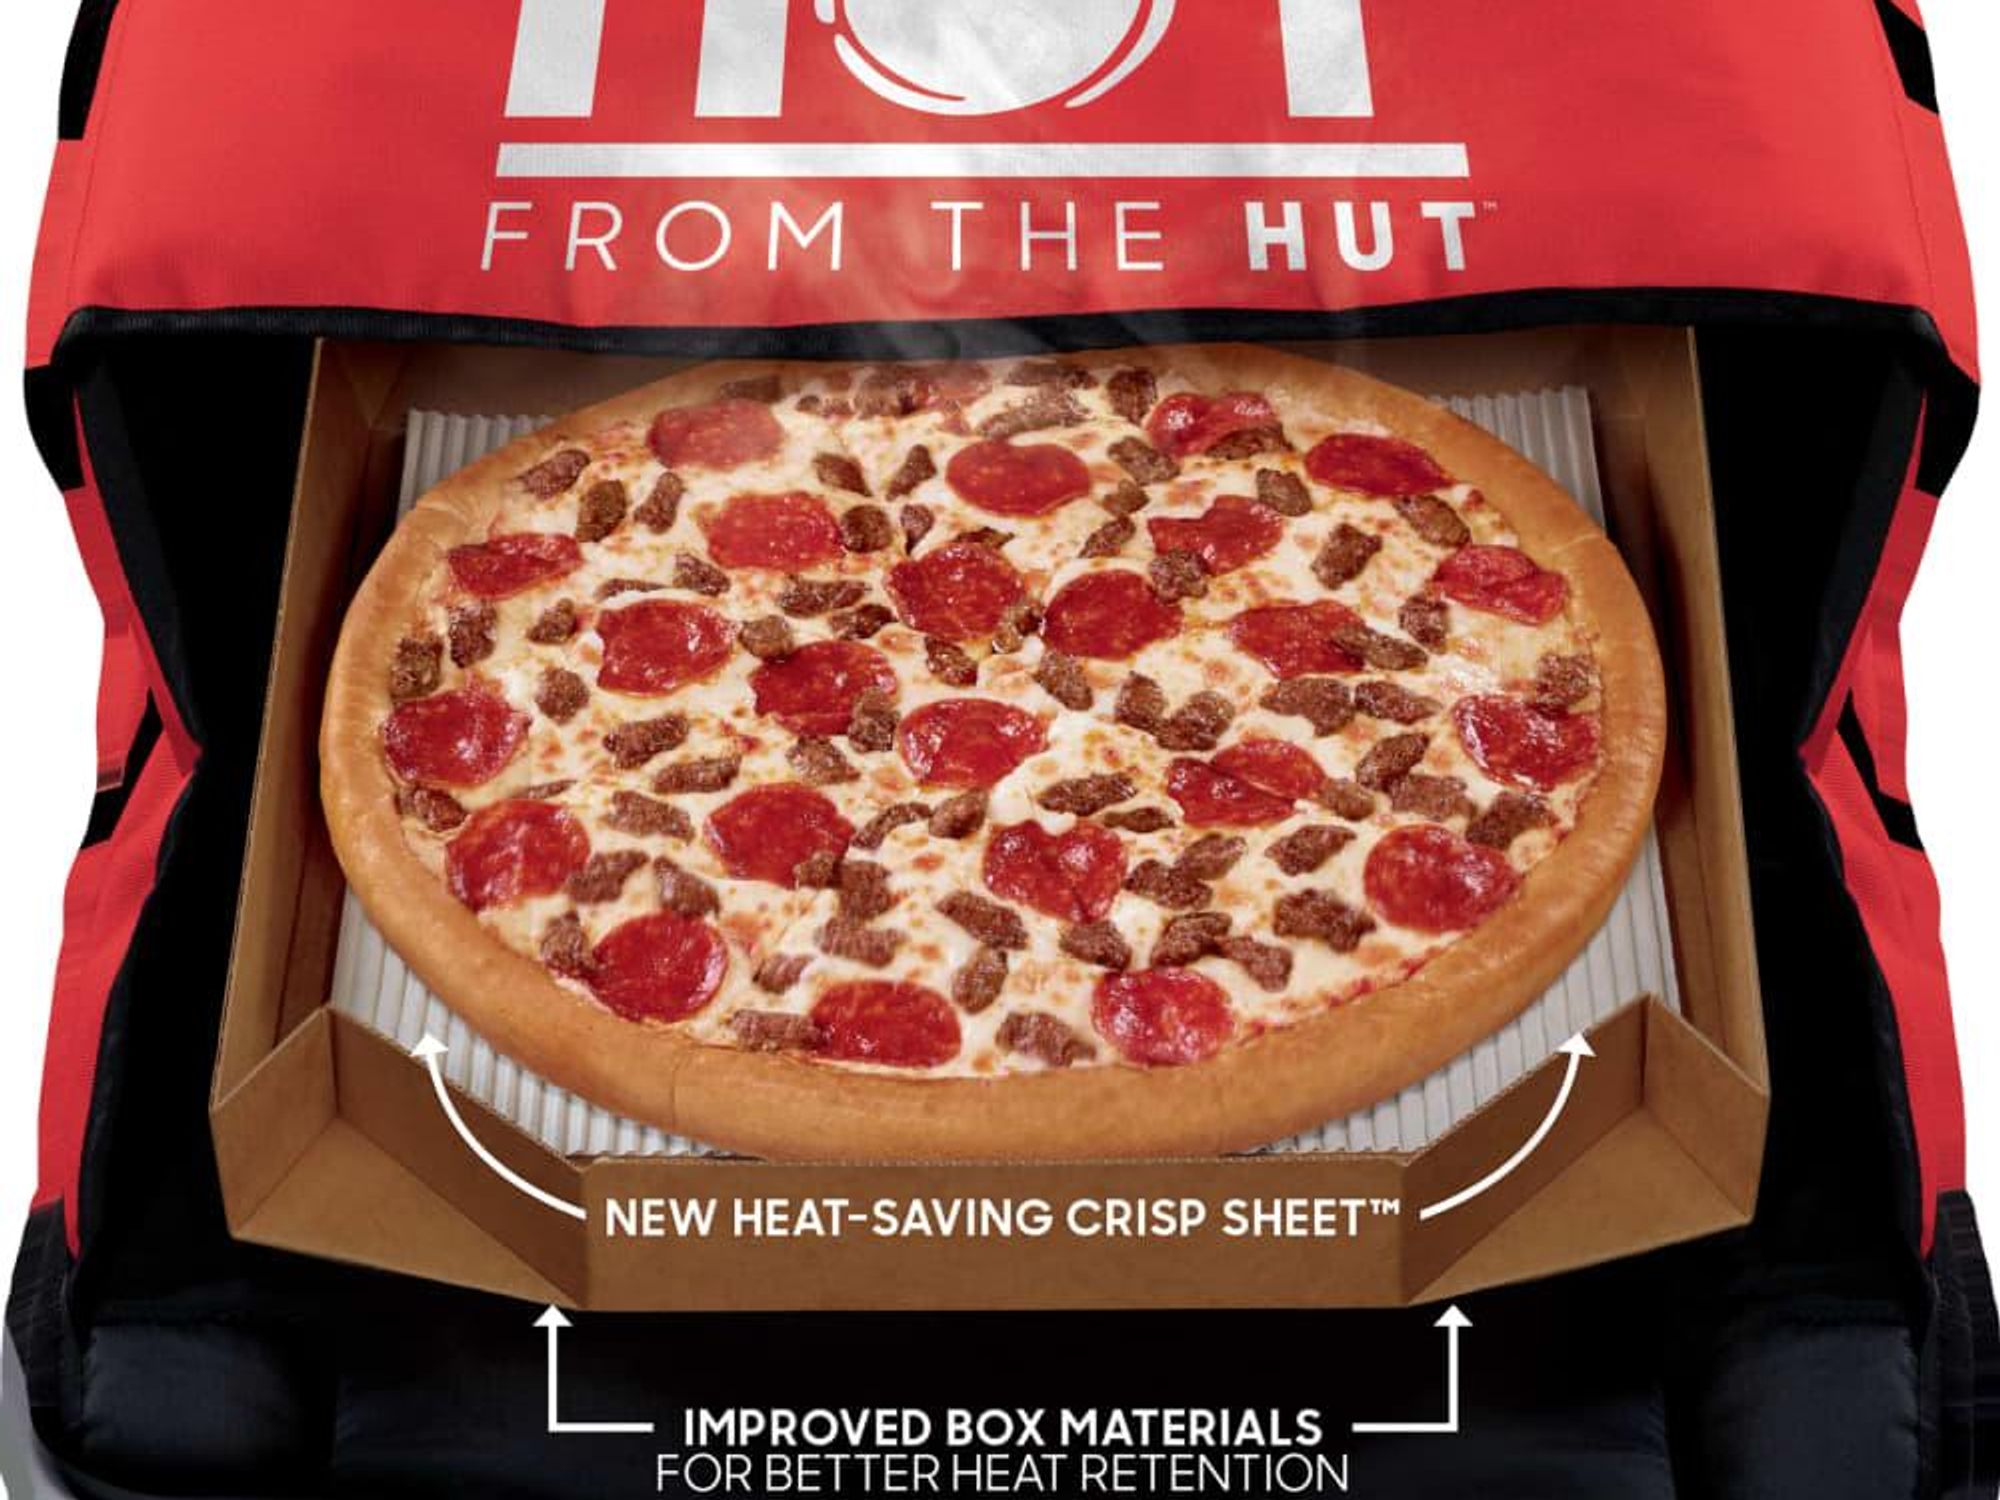 Pizza Hut on X: Share the box, share the love.